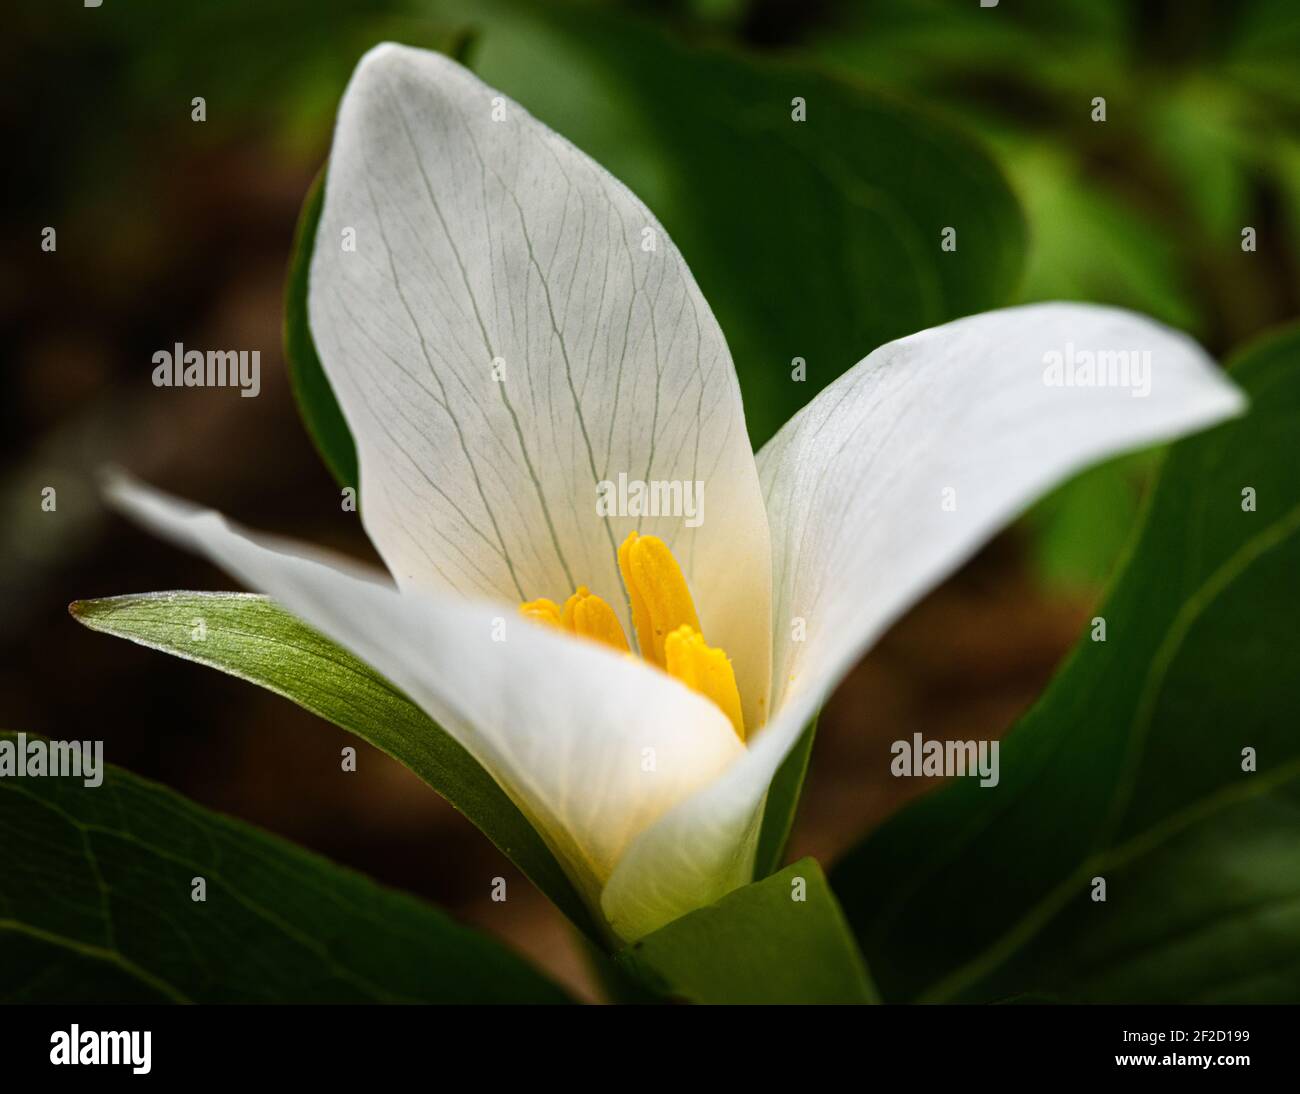 Trillium flower open in early spring to reveal their yellow center within the white flower Stock Photo